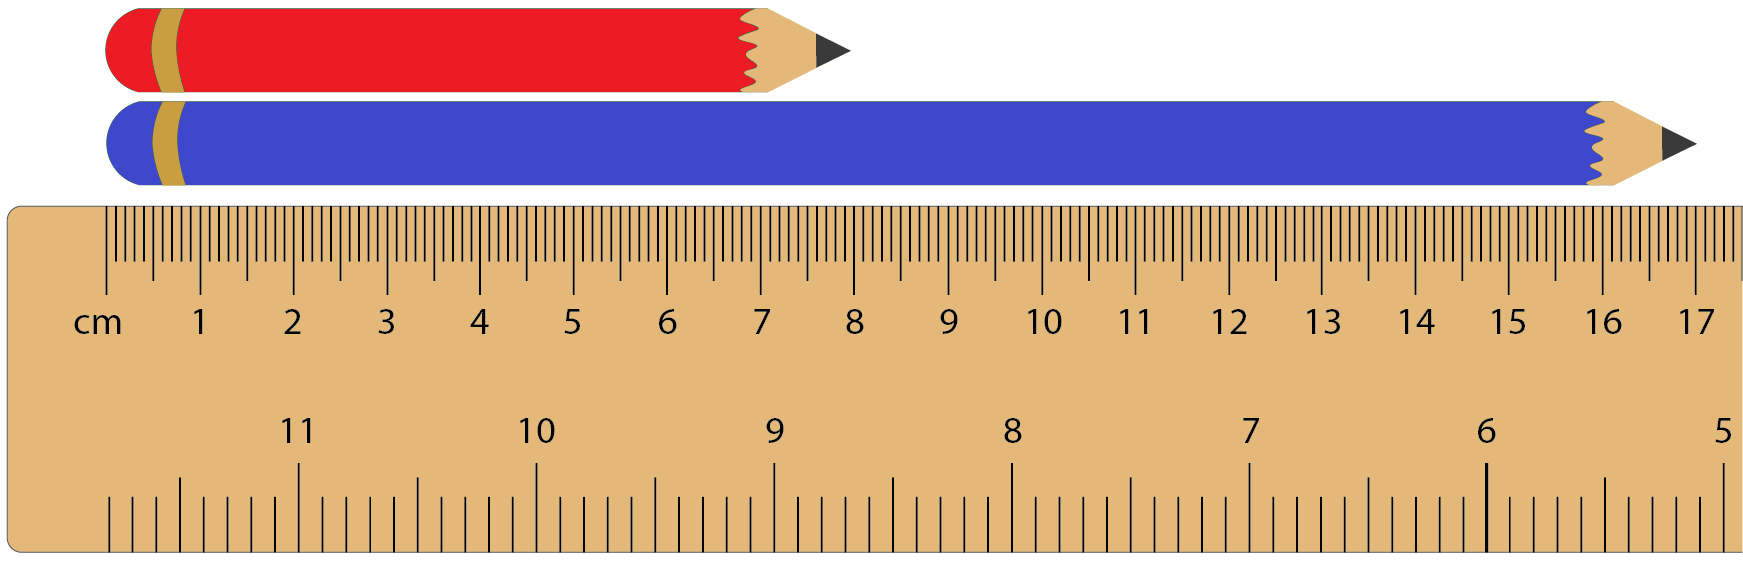 Image of two pencils aligned against a ruler.